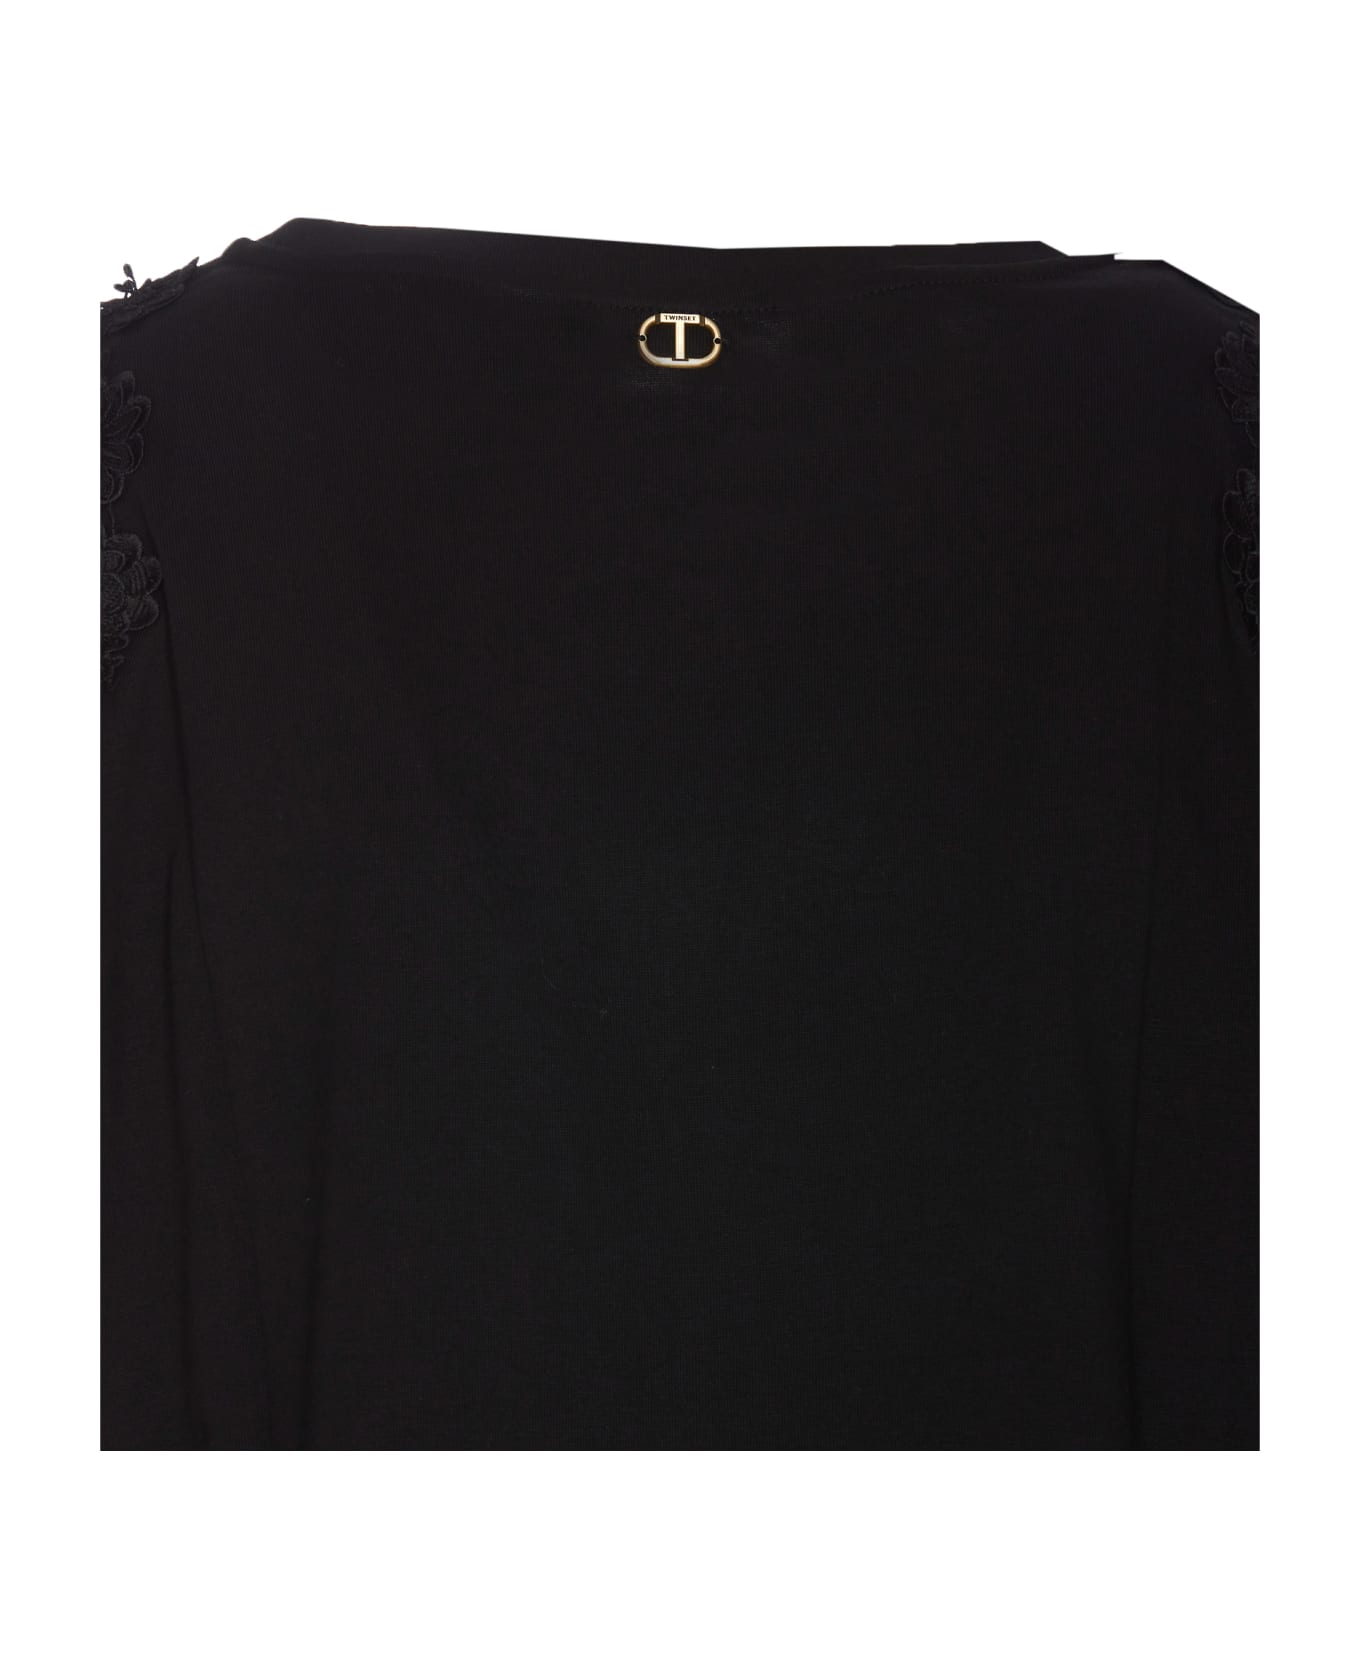 TwinSet T-shirt With Lace Details - Black